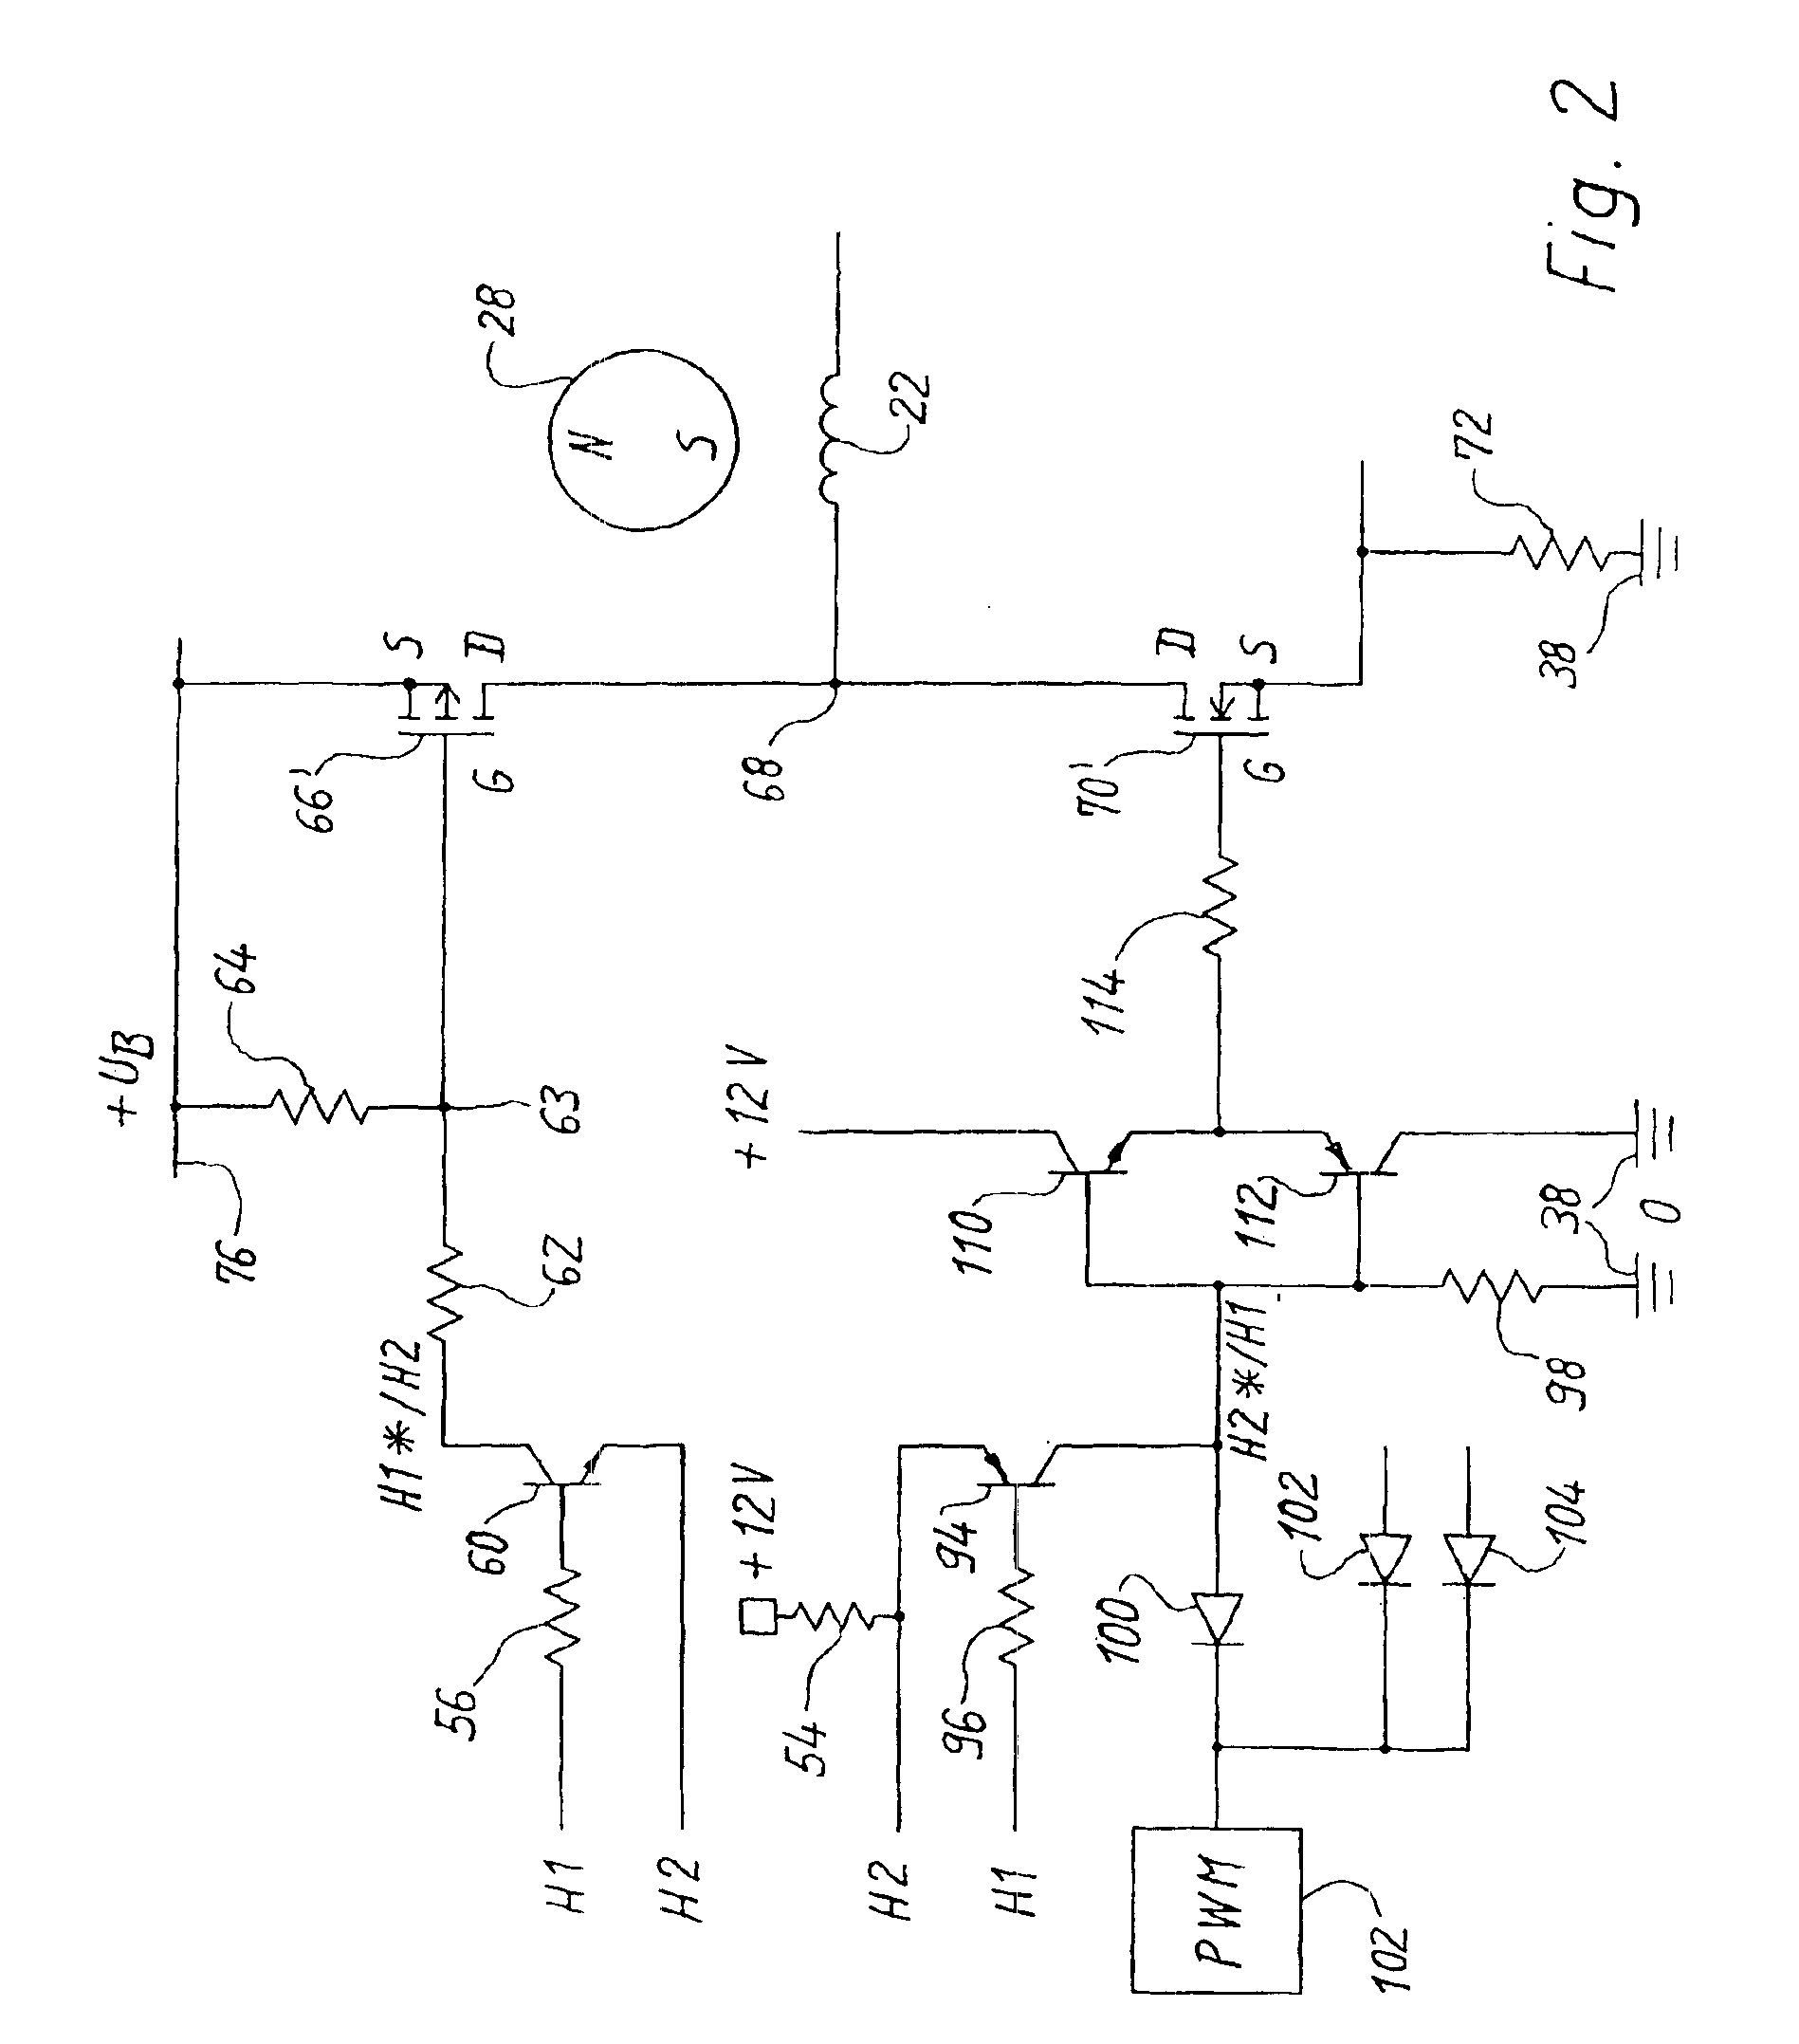 Electronically commutated DC motor comprising a bridge circuit